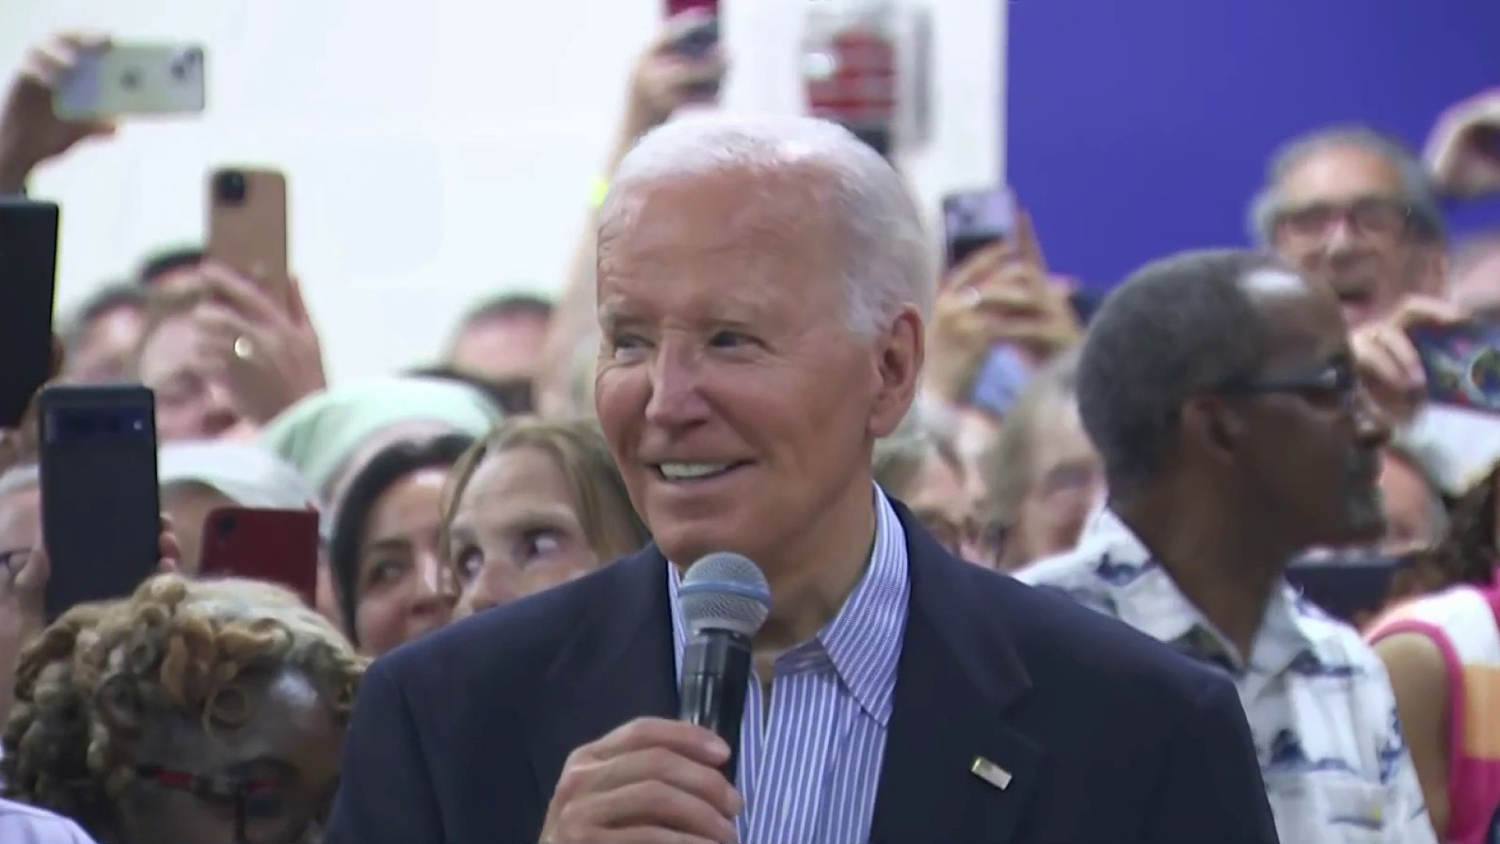 Biden in Wisconsin: 'I'm staying in the race'